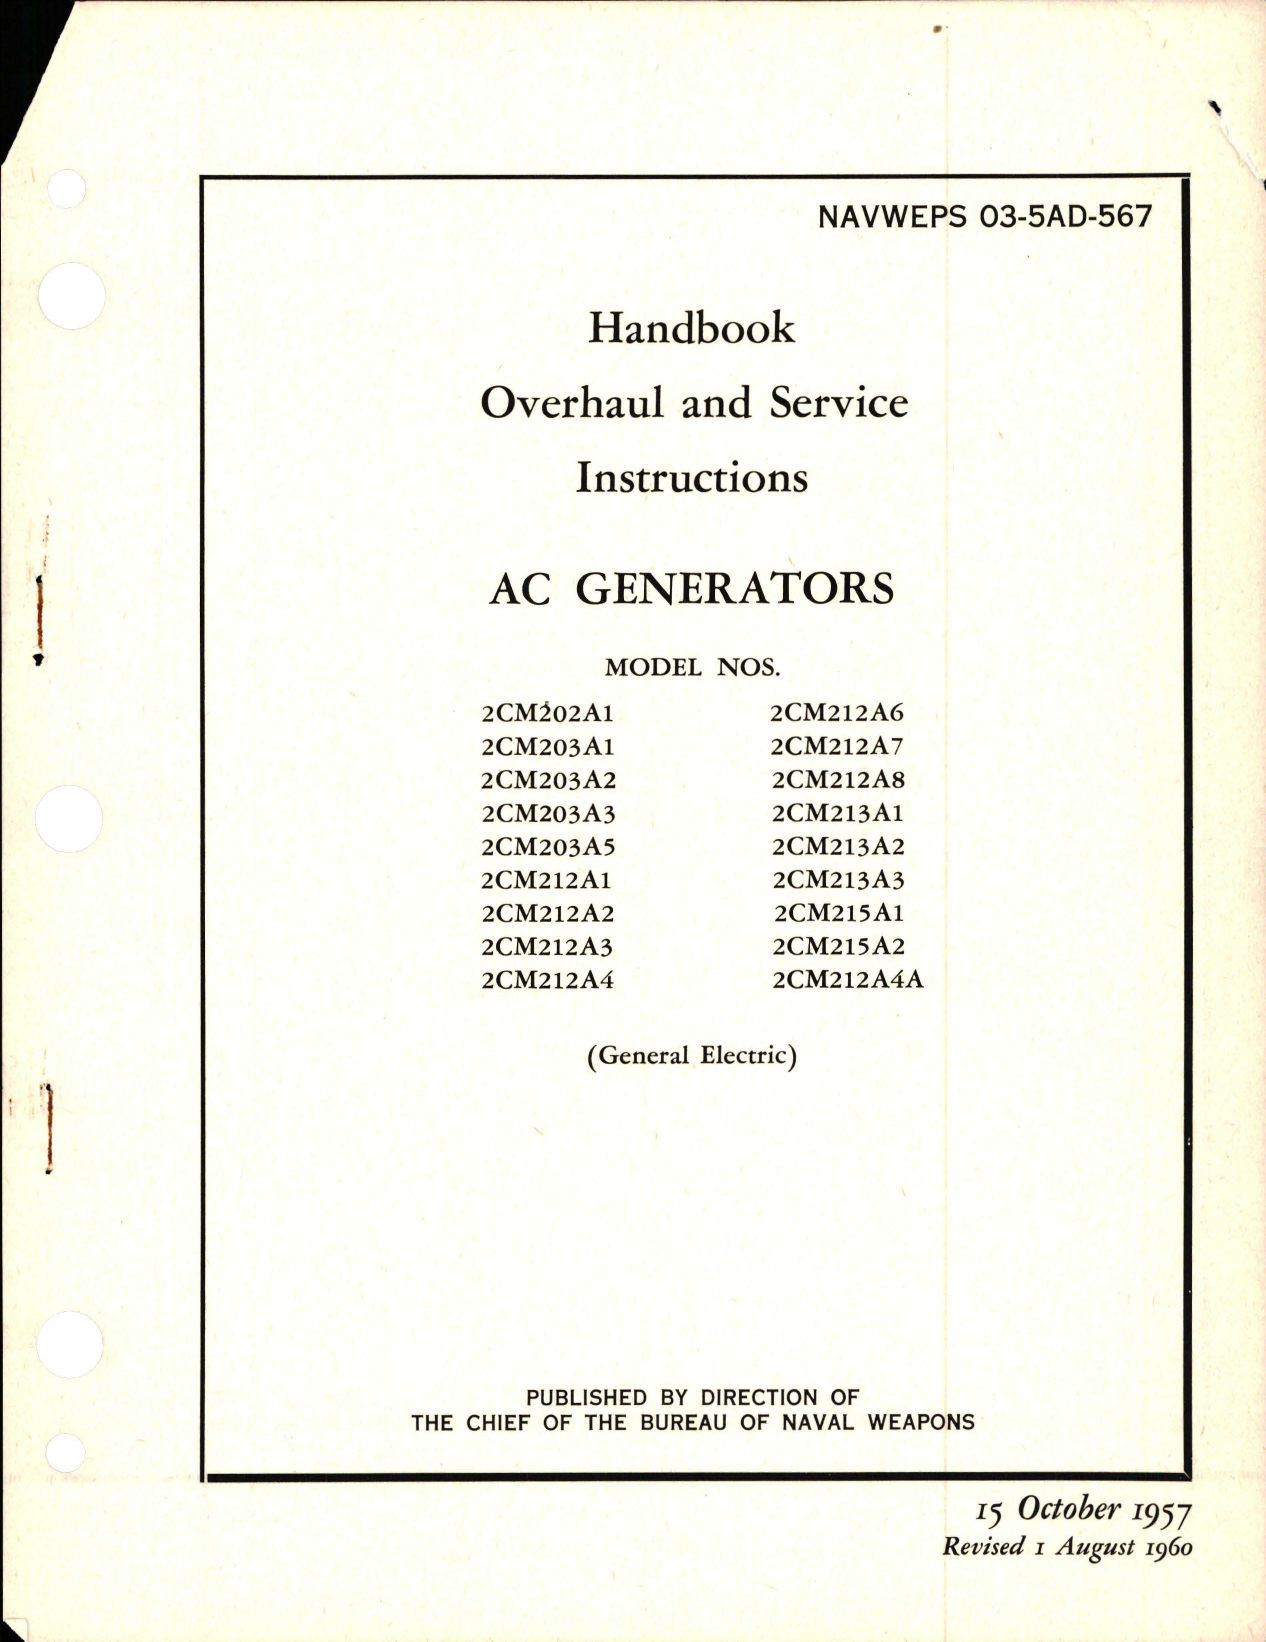 Sample page 1 from AirCorps Library document: Overhaul and Service Instructions for AC Generators 